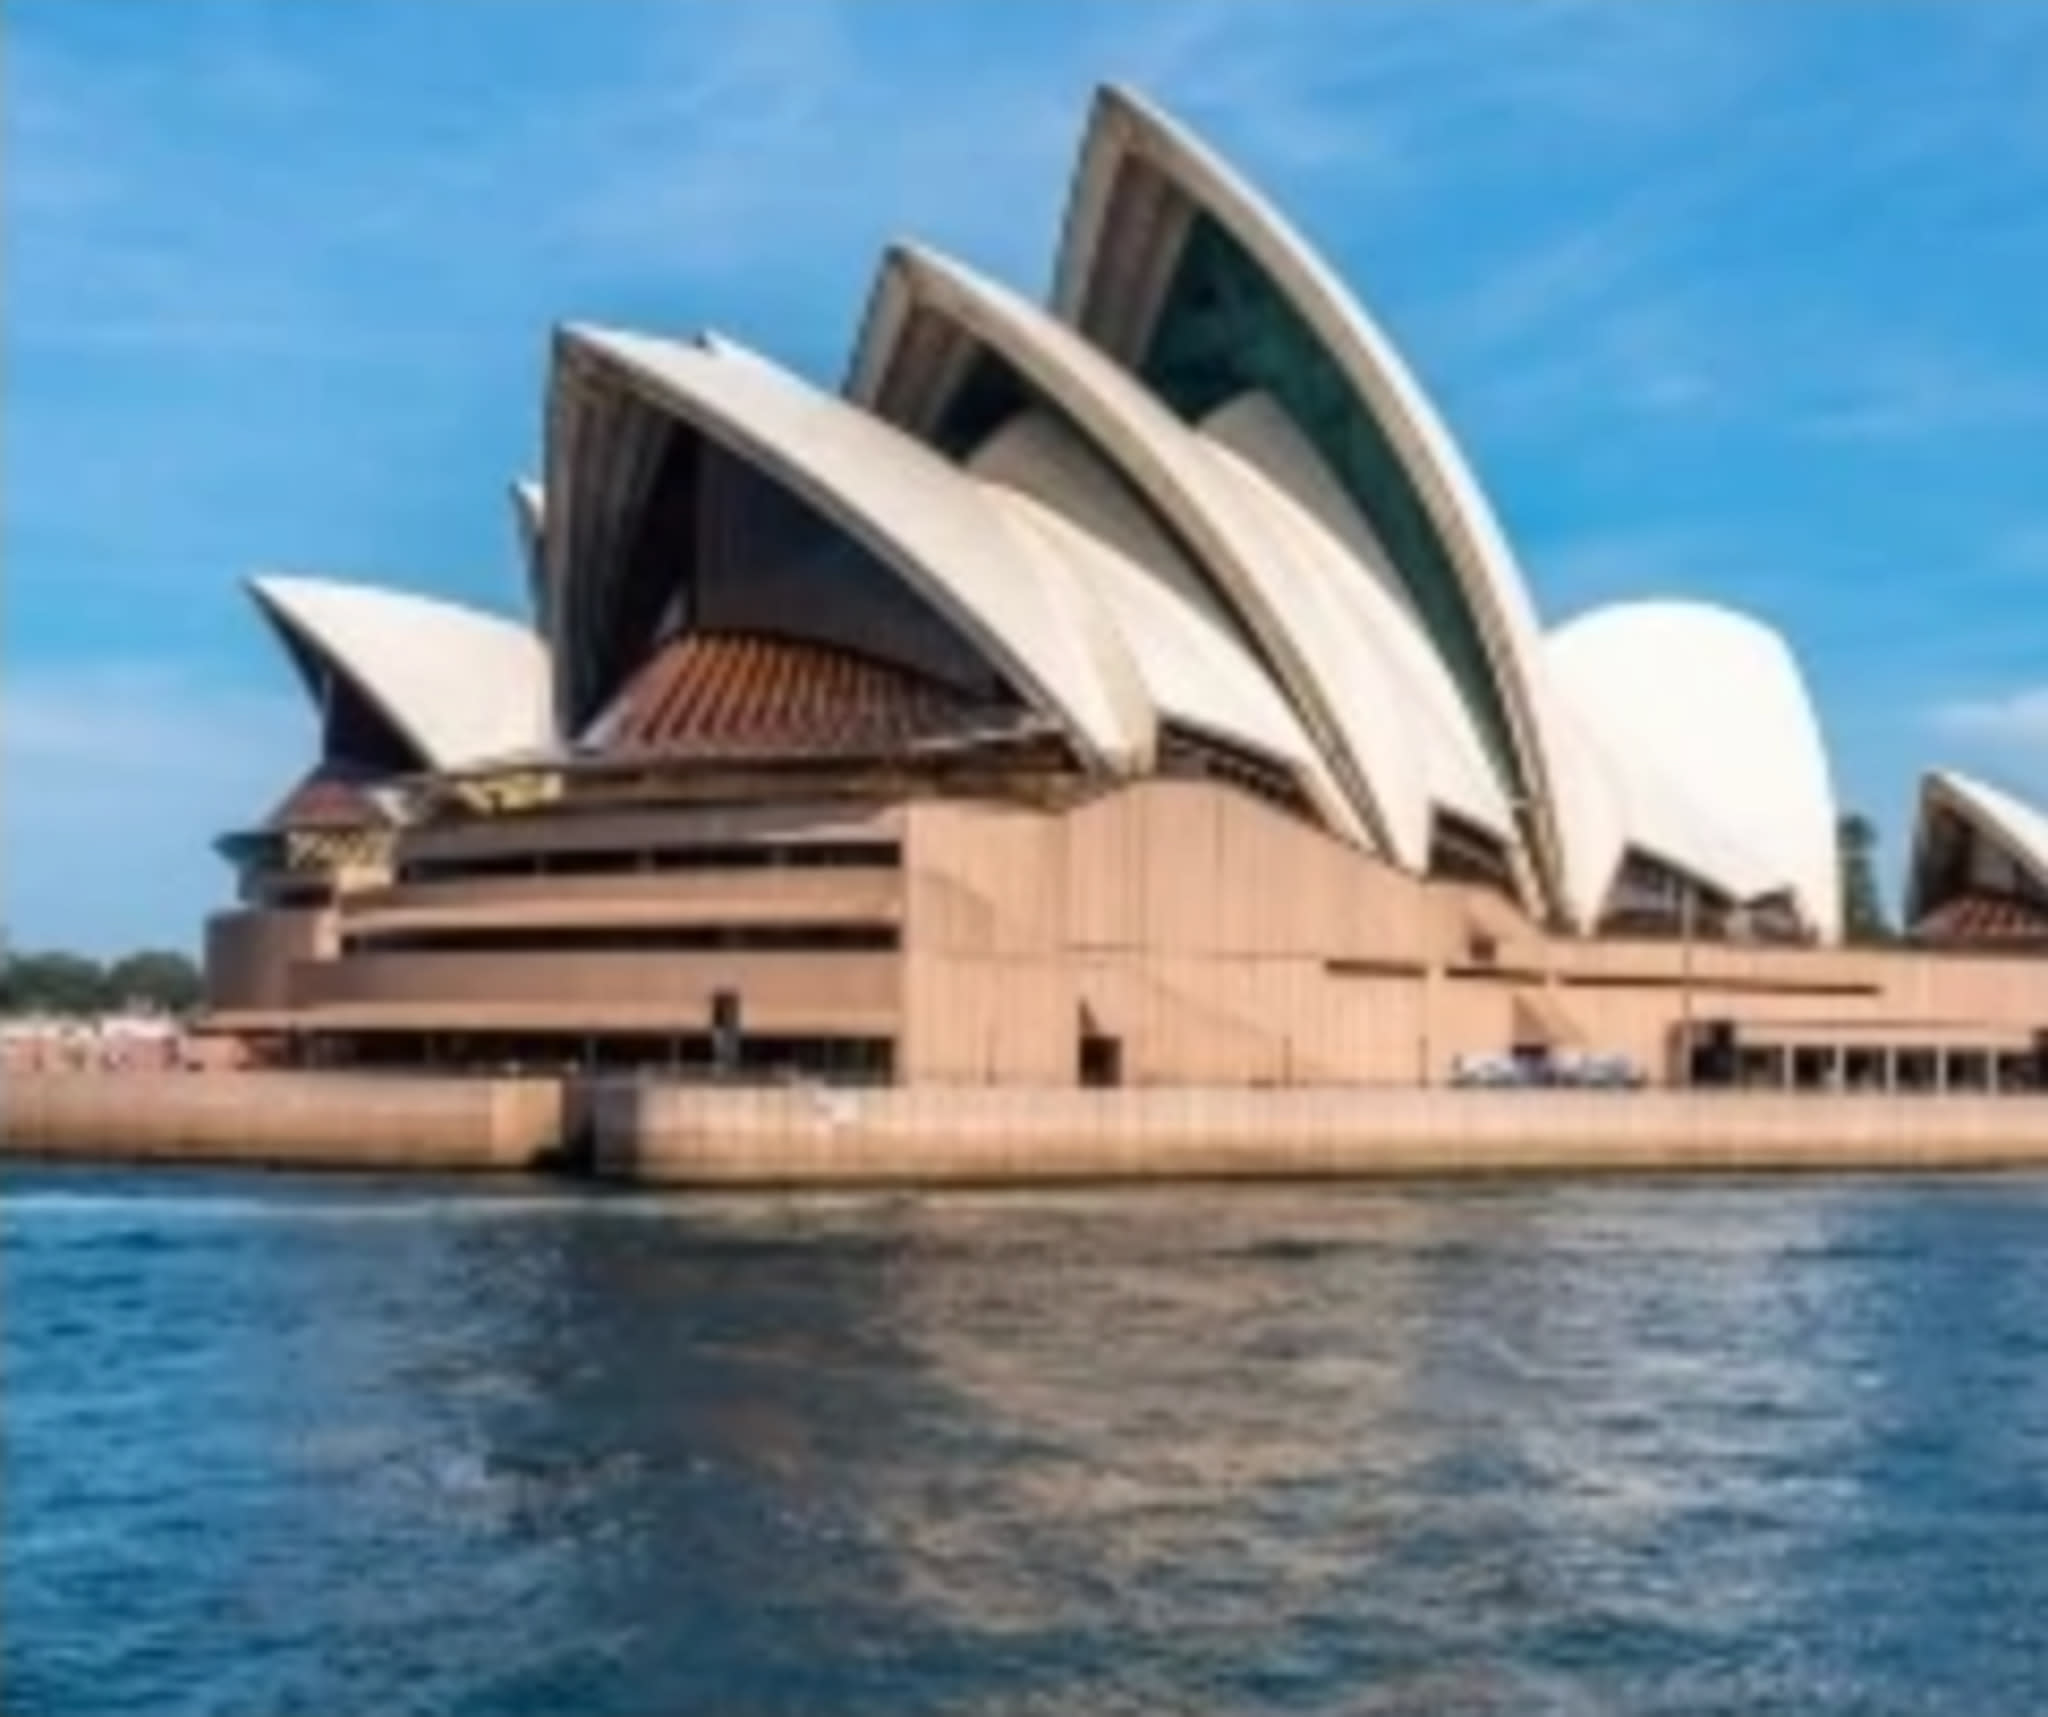 The Opera House in Sydney